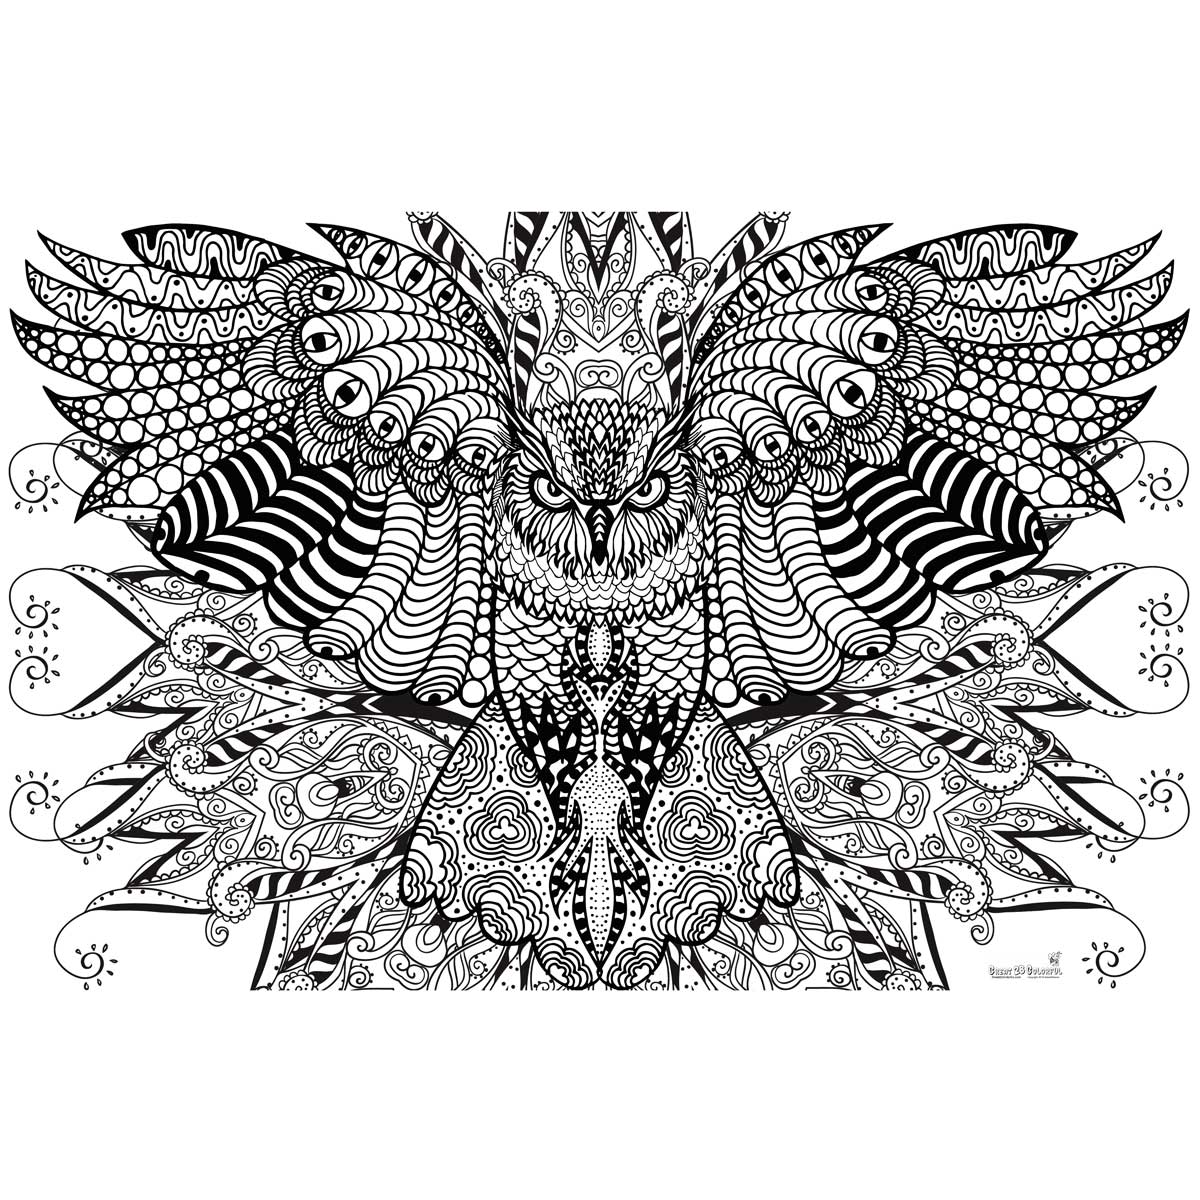 Great2bColorful - Mosaic Owl Coloring Poster